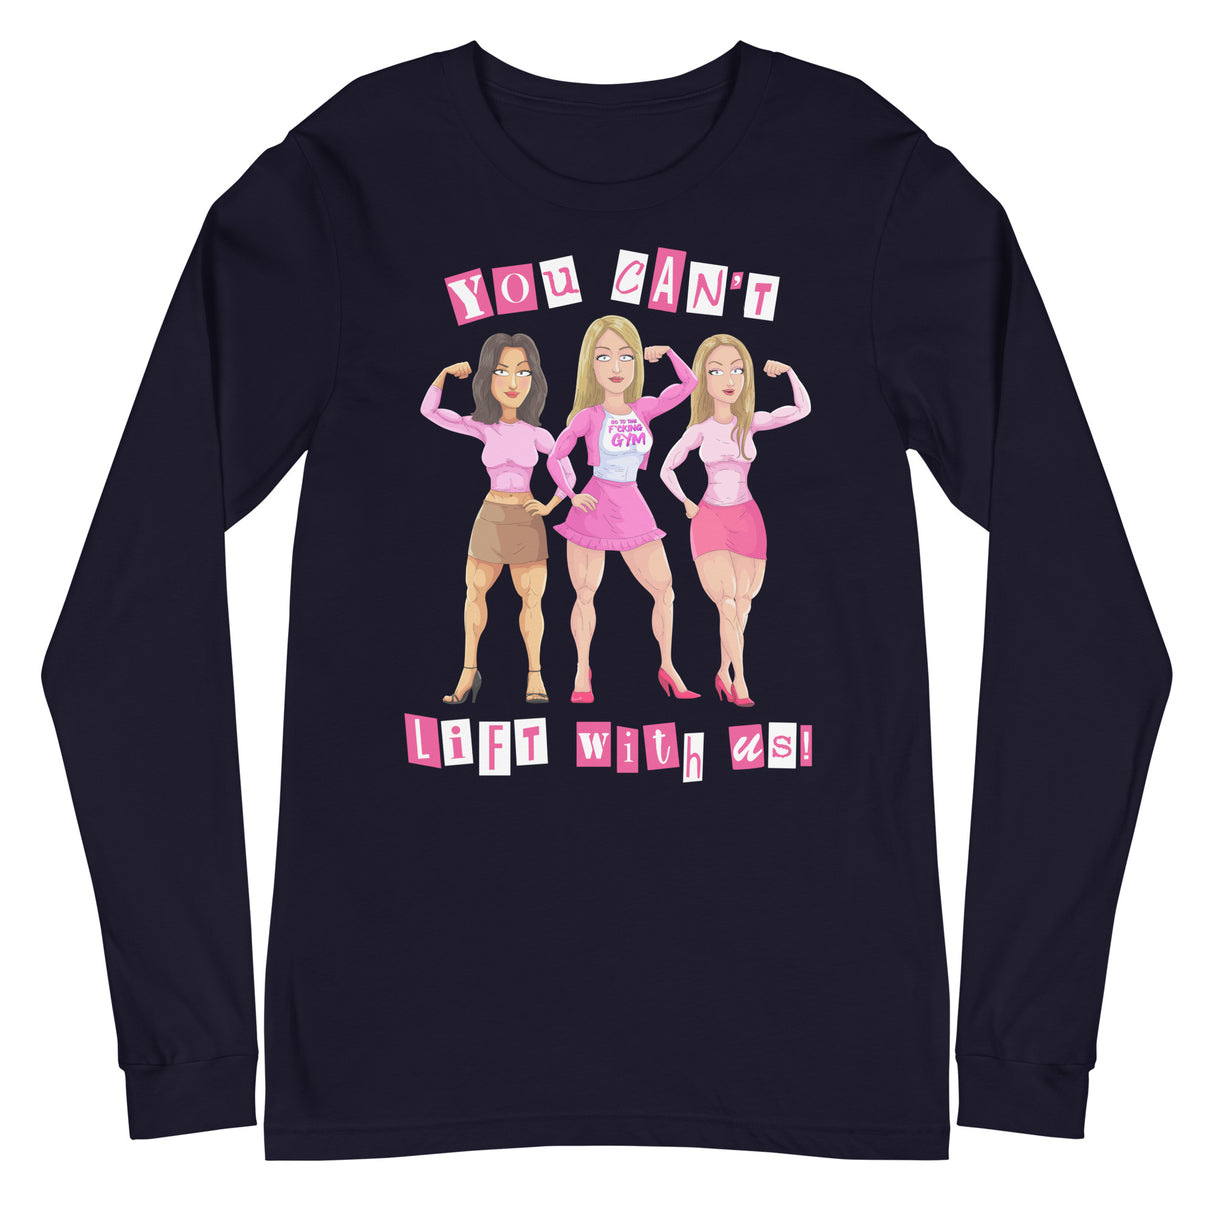 You Can't Lift With Us (Image) Long Sleeve T-Shirt